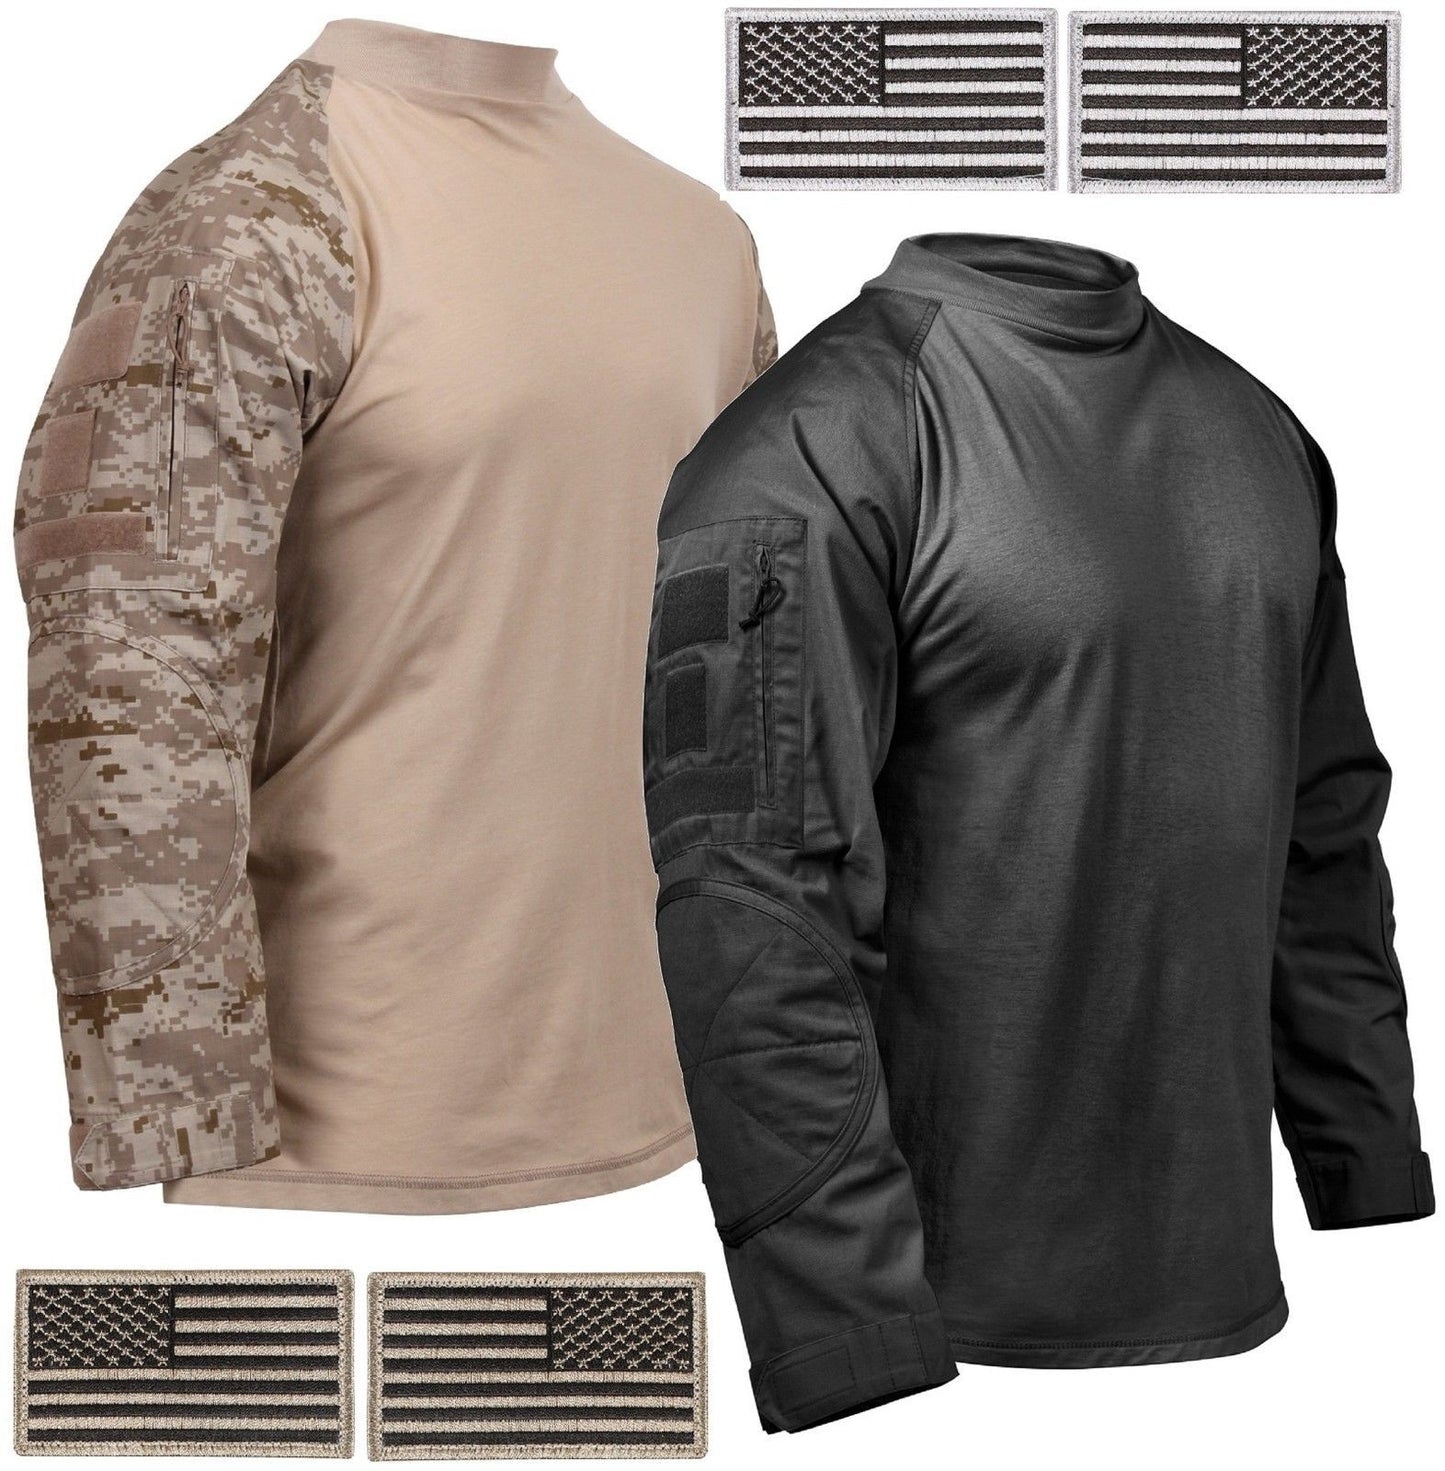 Rothco Mens Cotton Blend Tactical Airsoft Combat Shirt & 2 Free USA Flag Patches